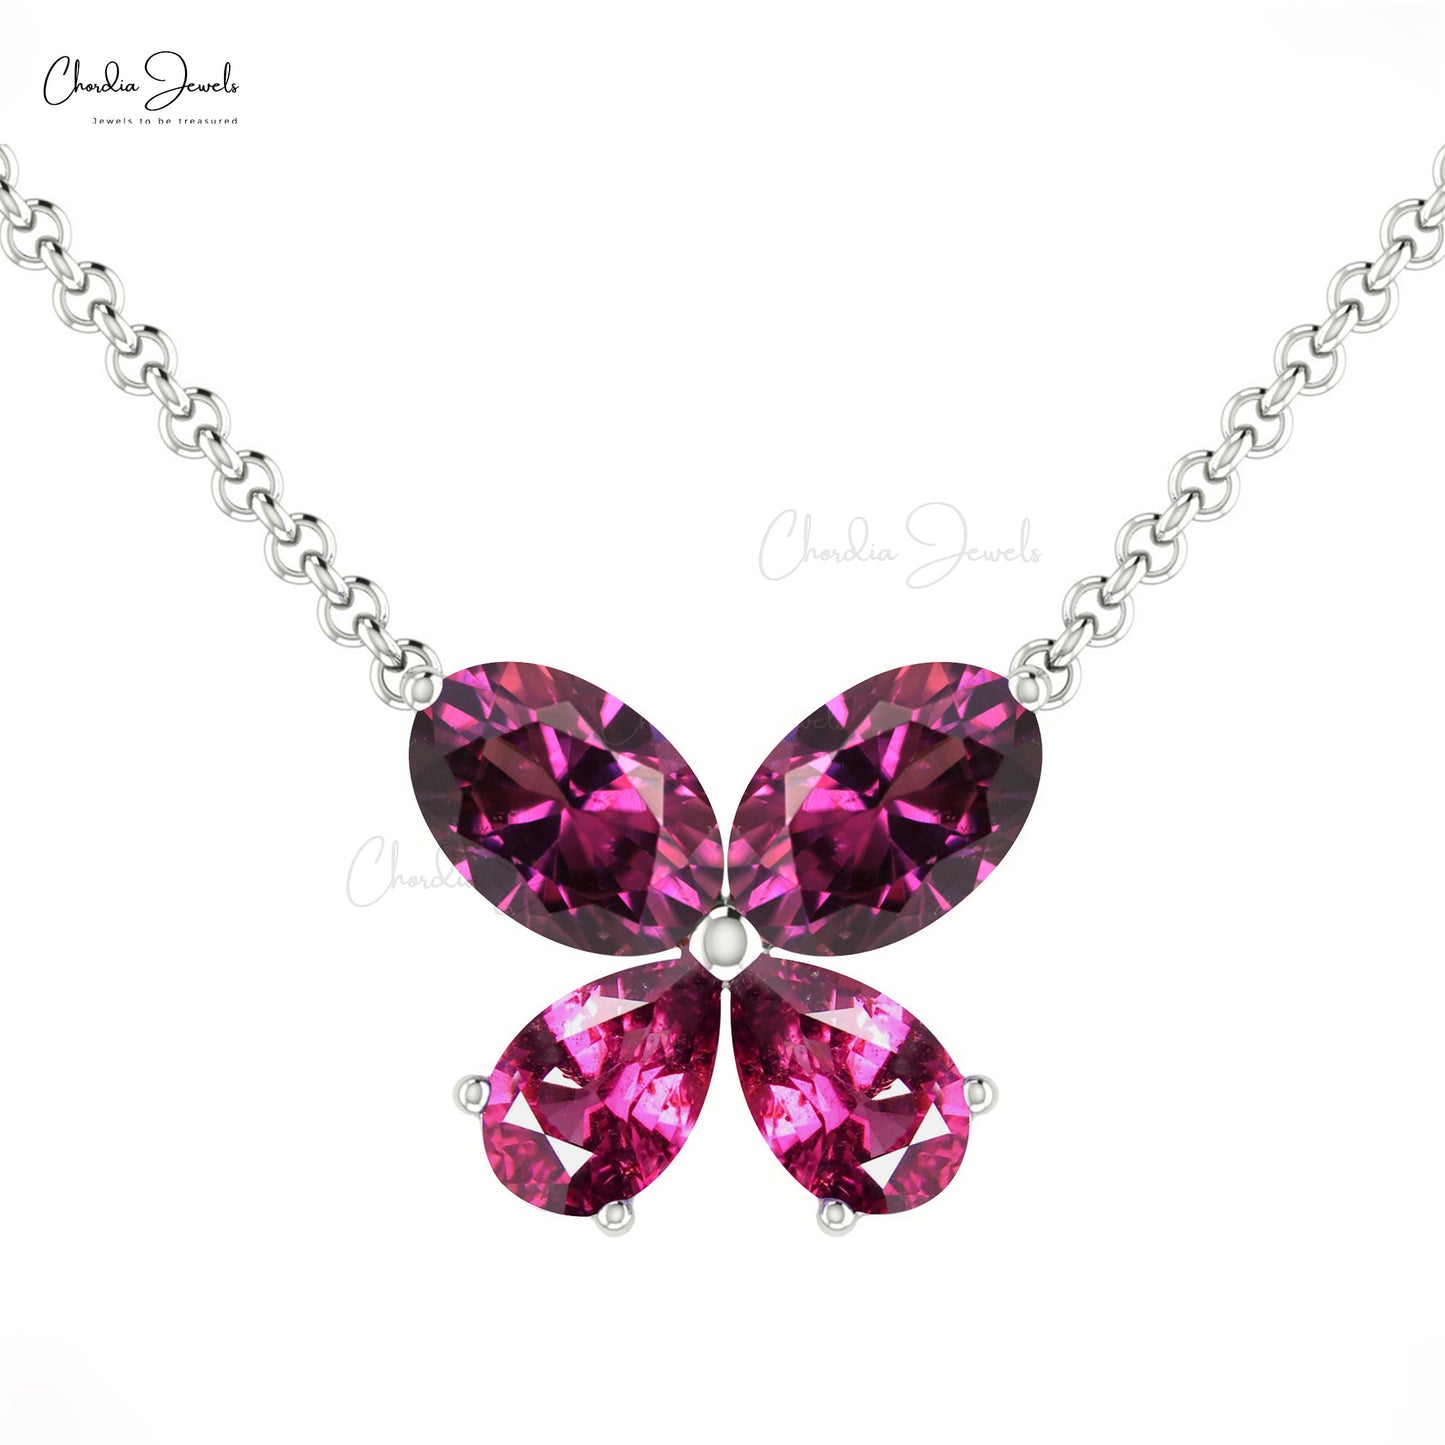 Classical Butterfly Natural Rhodolite Garnet Necklace Pendant Newest Popular Oval Shape January Birthstone Gemstone Necklace in 14k Pure Gold Gift For Her